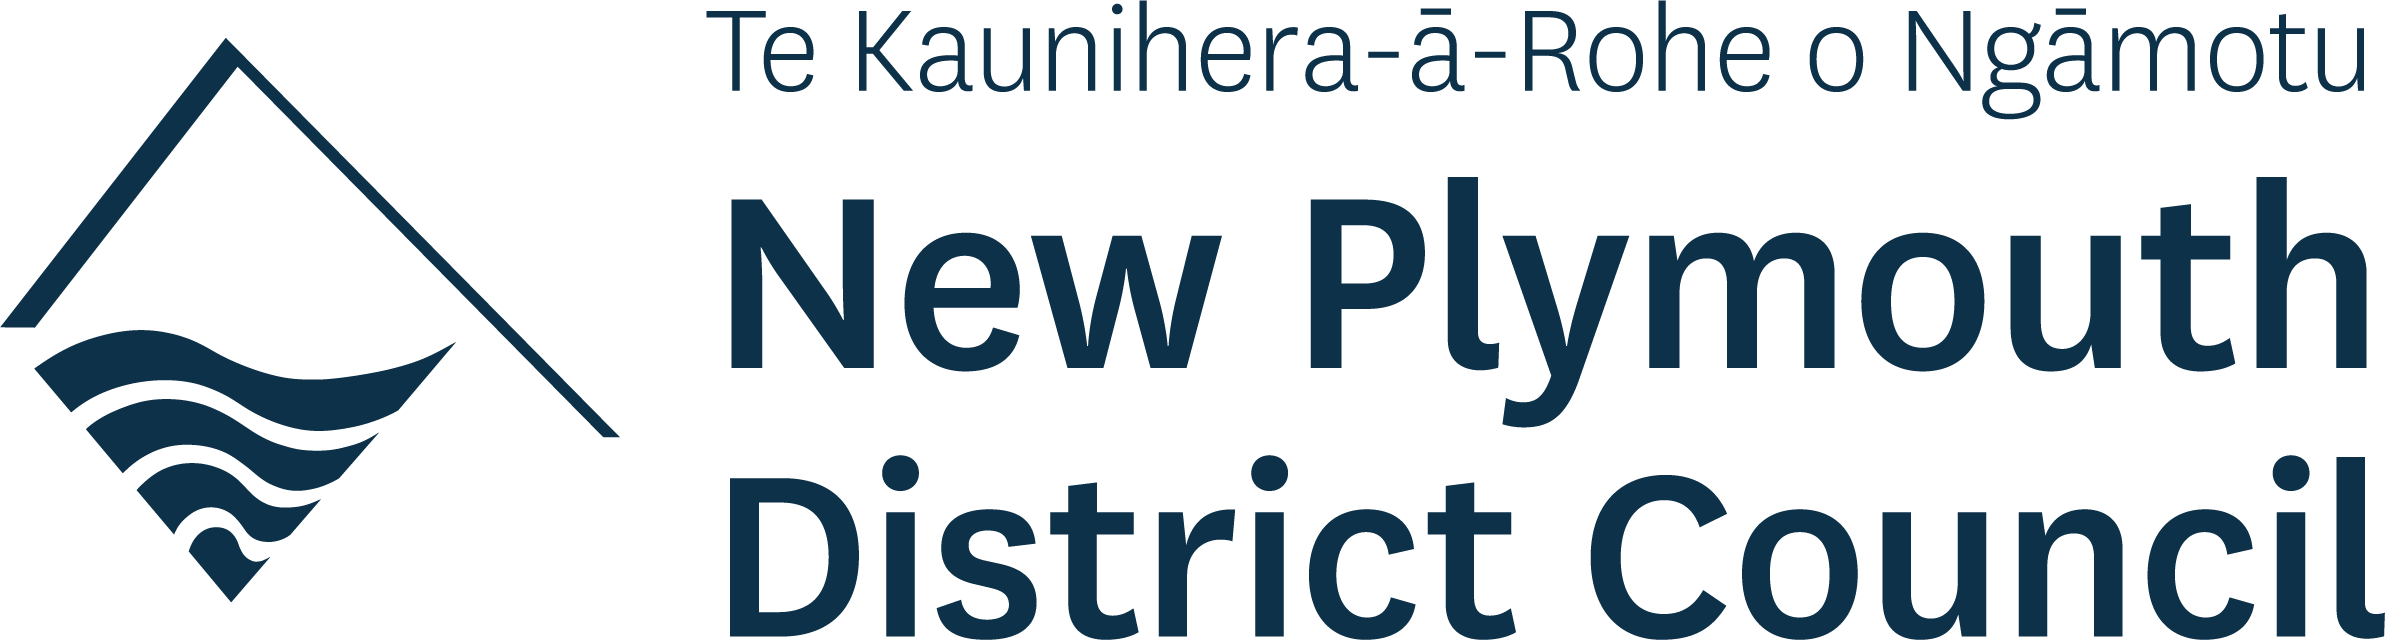 New Plymouth District Council logo